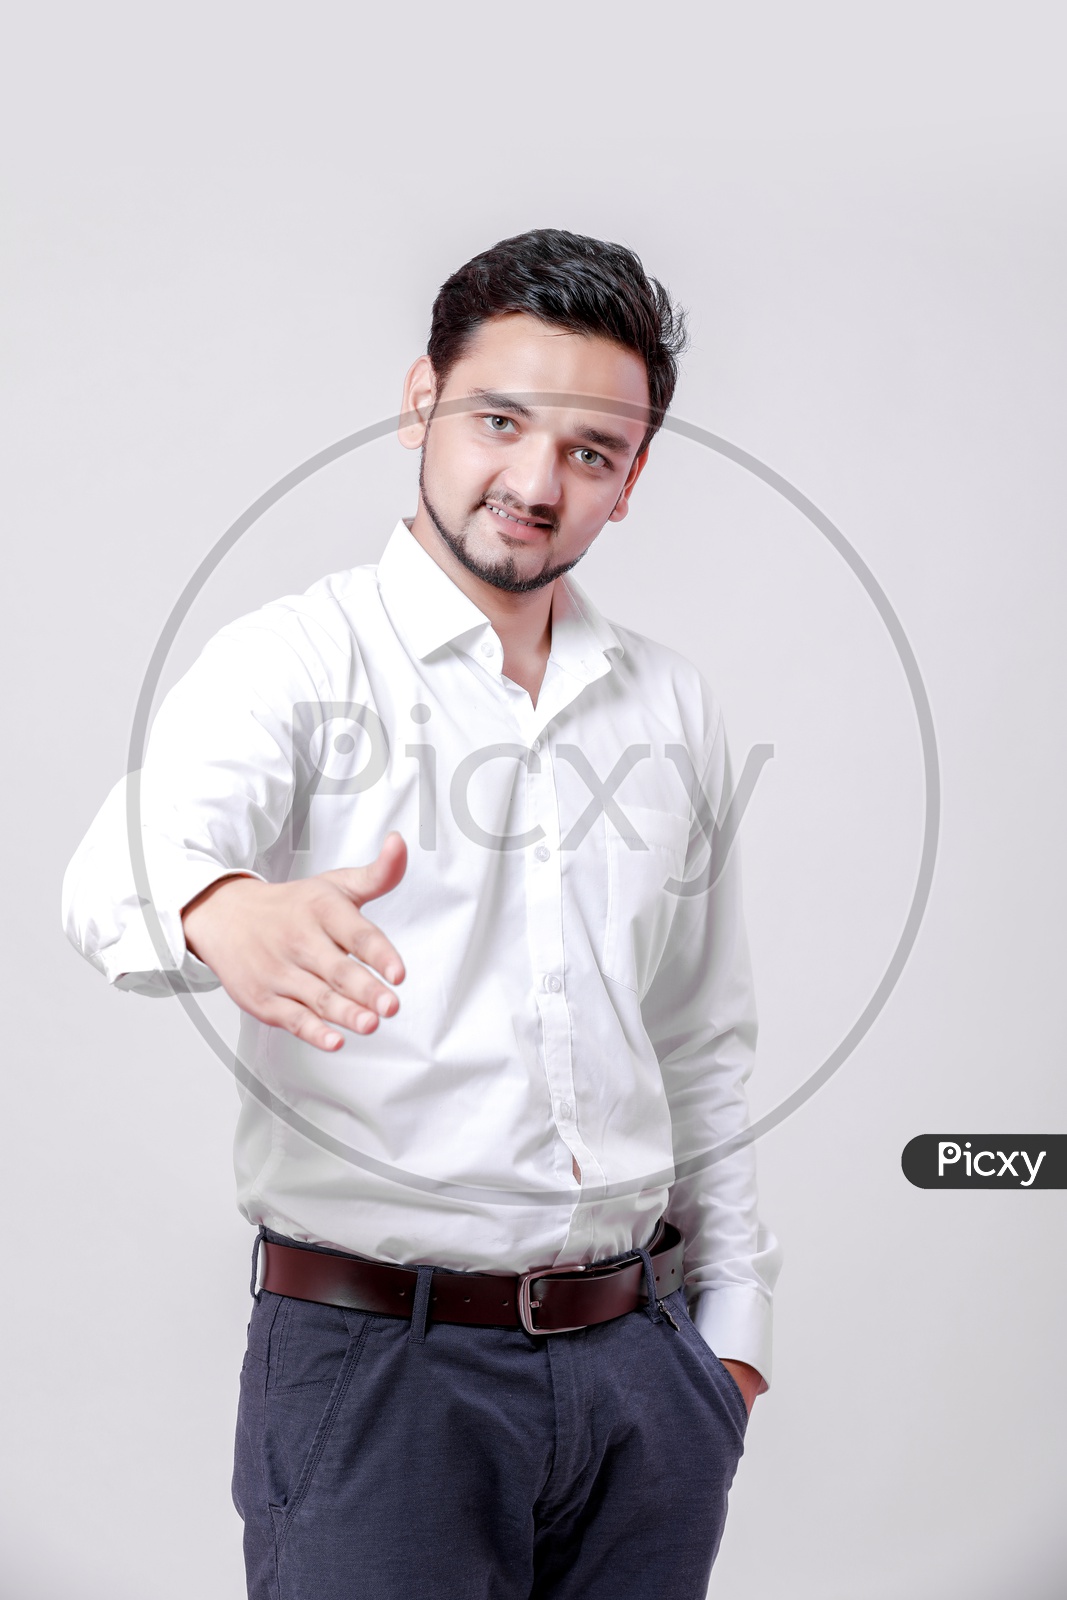 Indian Young Professional Man With a Smiling Face and Doing Gestures  On an Isolated White Background